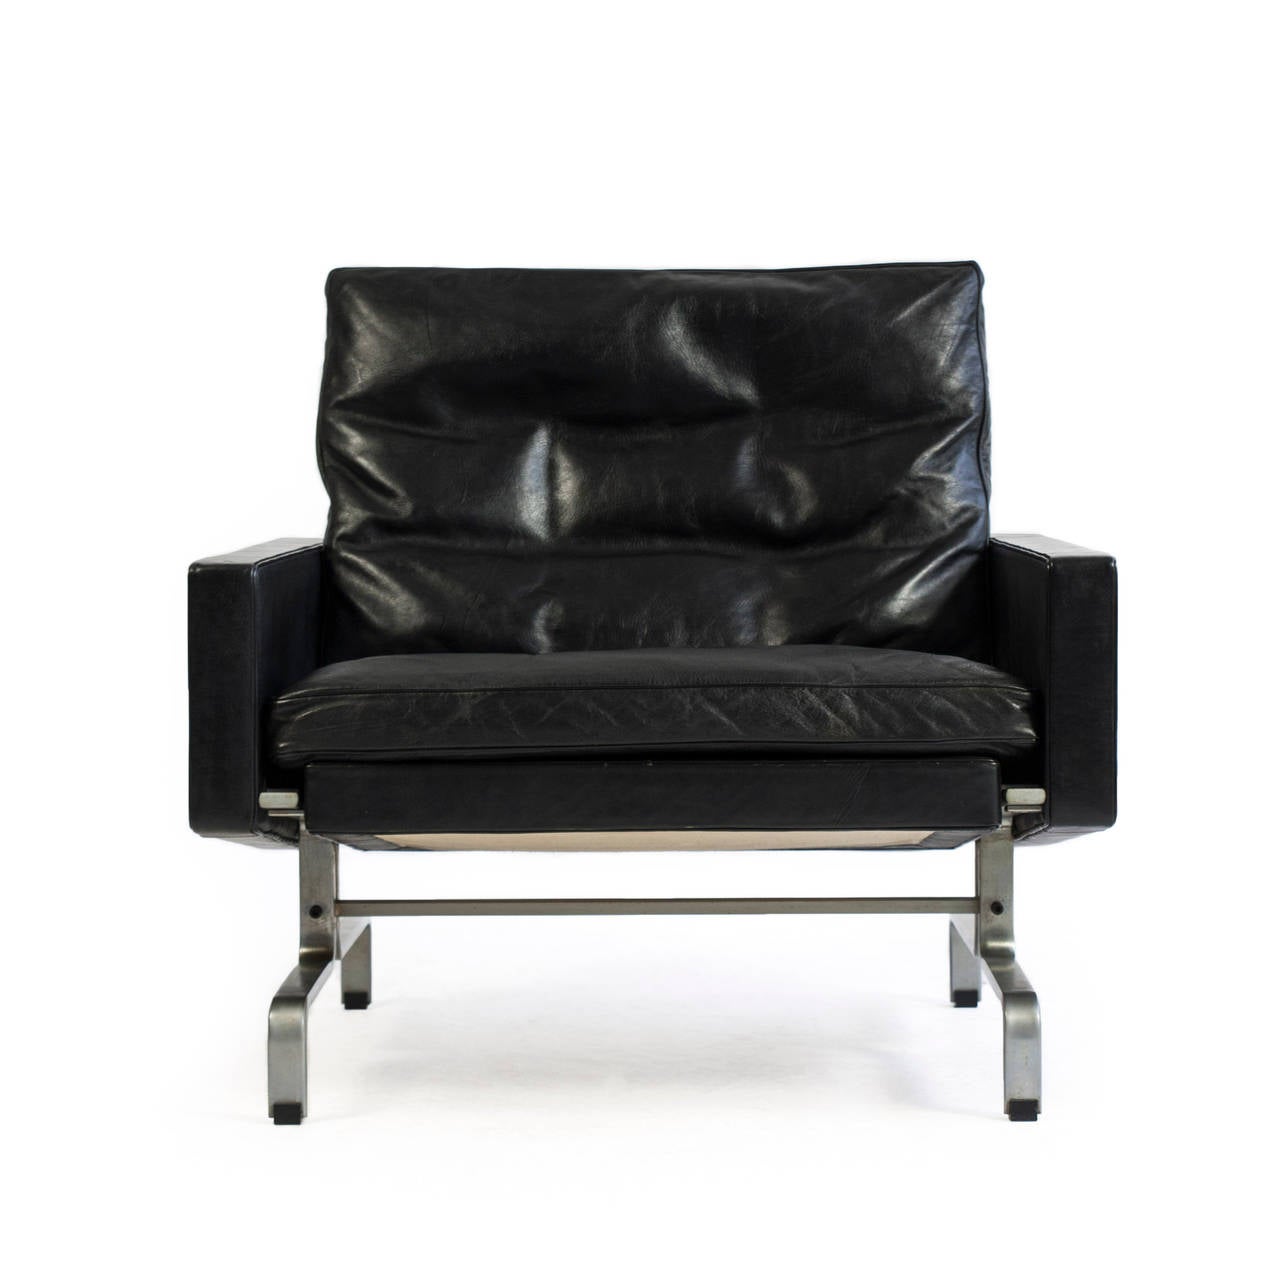 Poul kjaerholm PK31/1 lounge chair with legs of steel, frame and loose cushions upholstered with original black patinated leather. 

Designed 1958, manufactured and marked by E. Kold Christensen, Denmark.

Fine original condition.